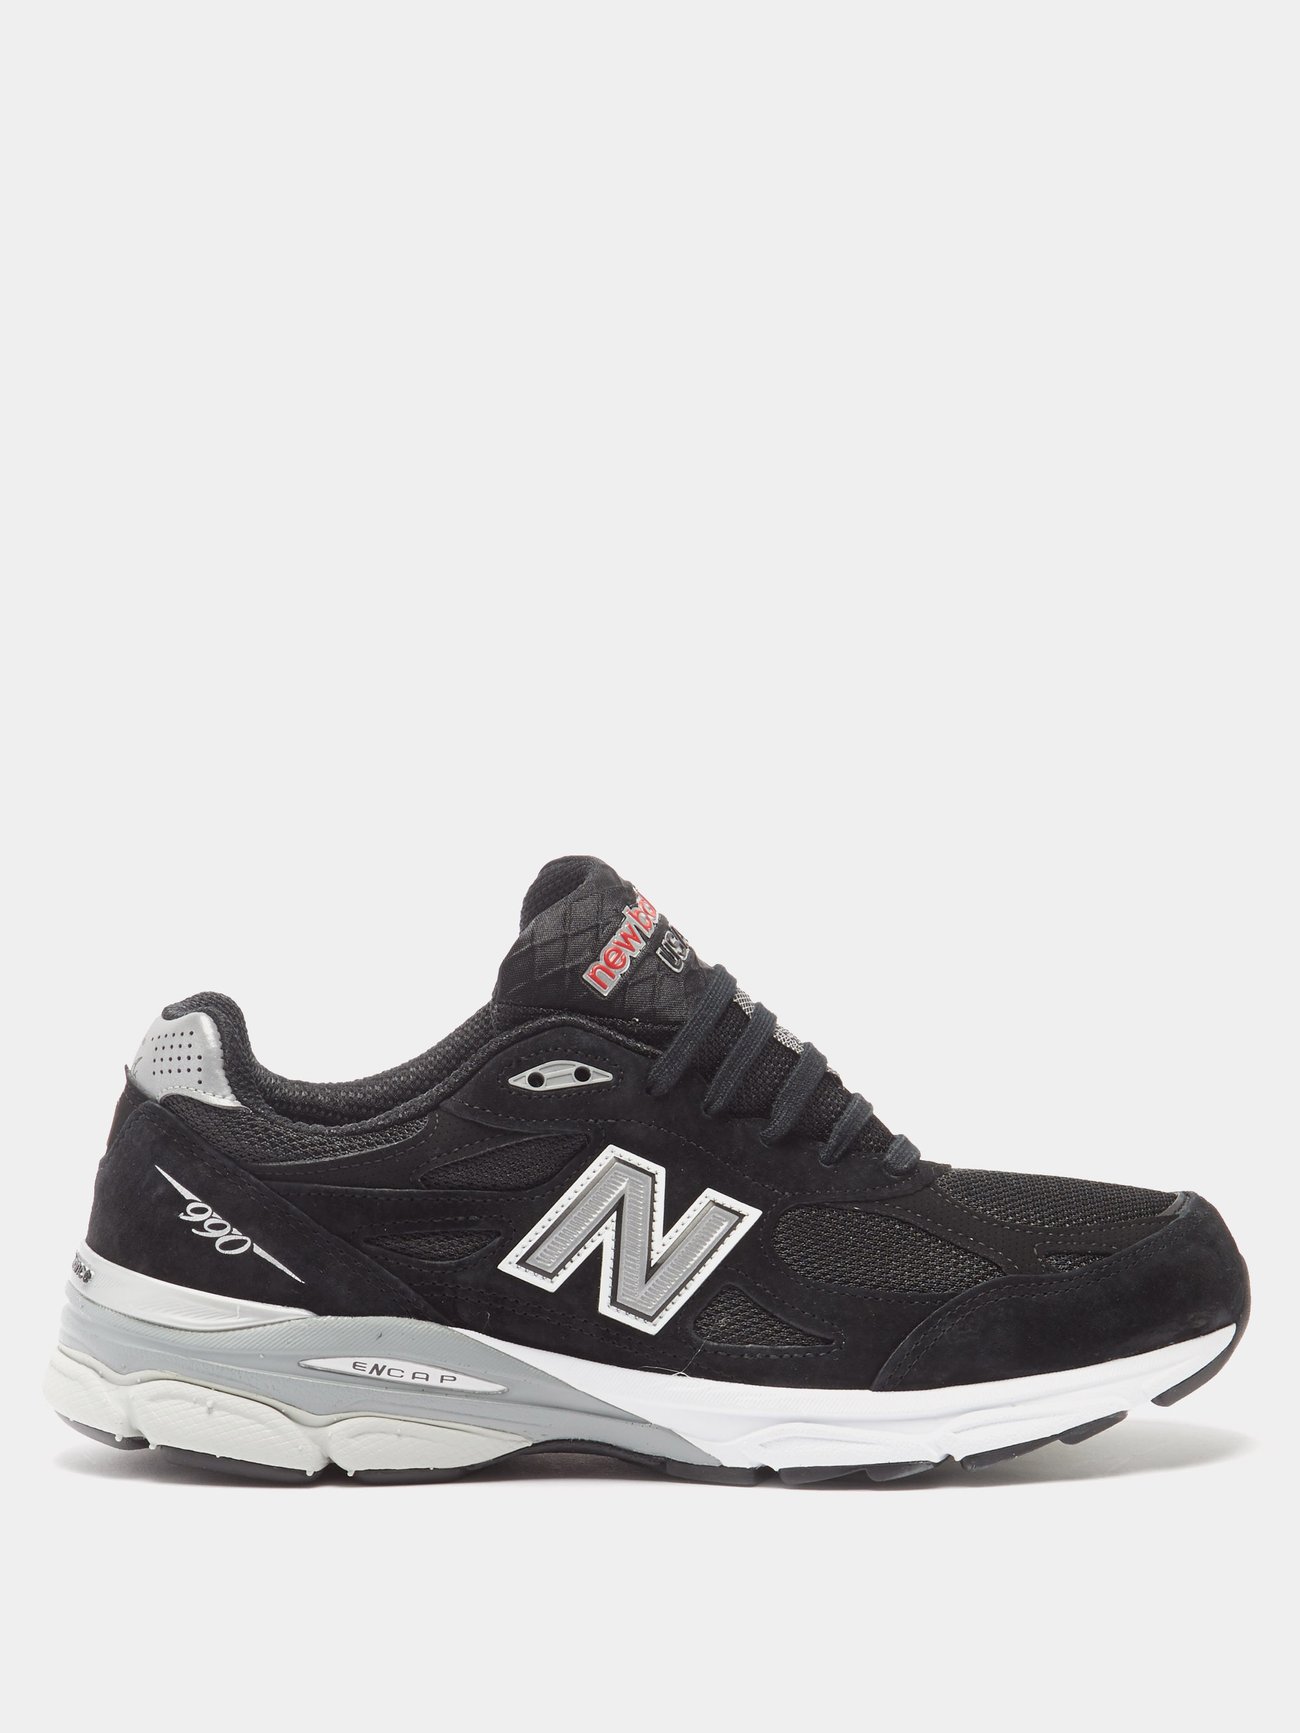 Black Made in USA 990v3 mesh and suede trainers | New Balance 